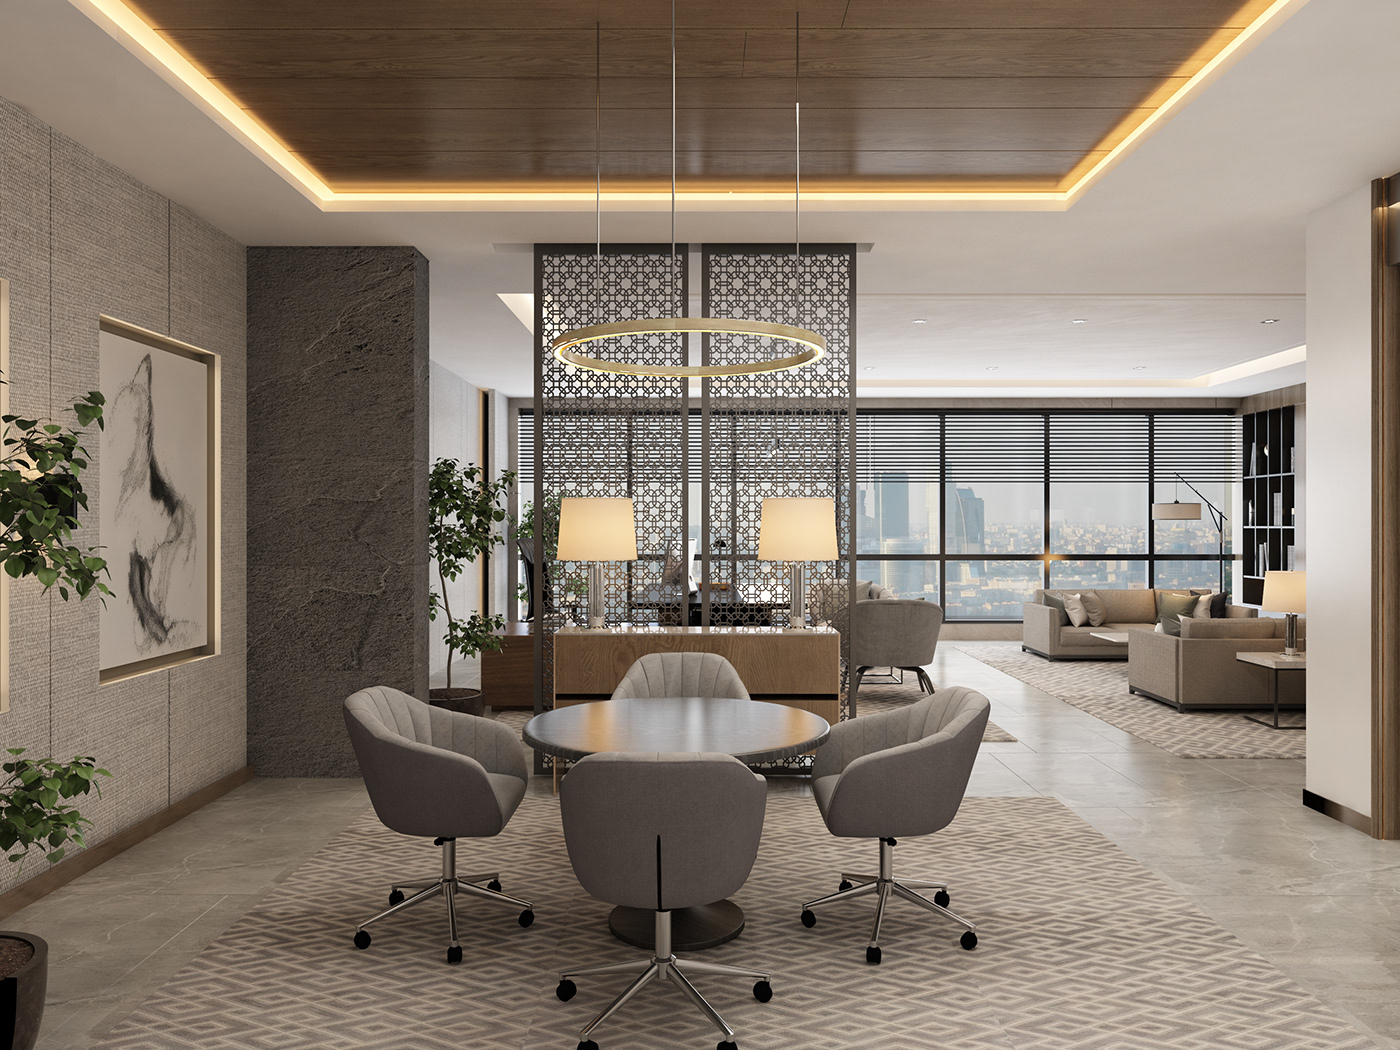 Boardroom Executive office interior design  Luxury Design manager office meeting room Office interior Office Space